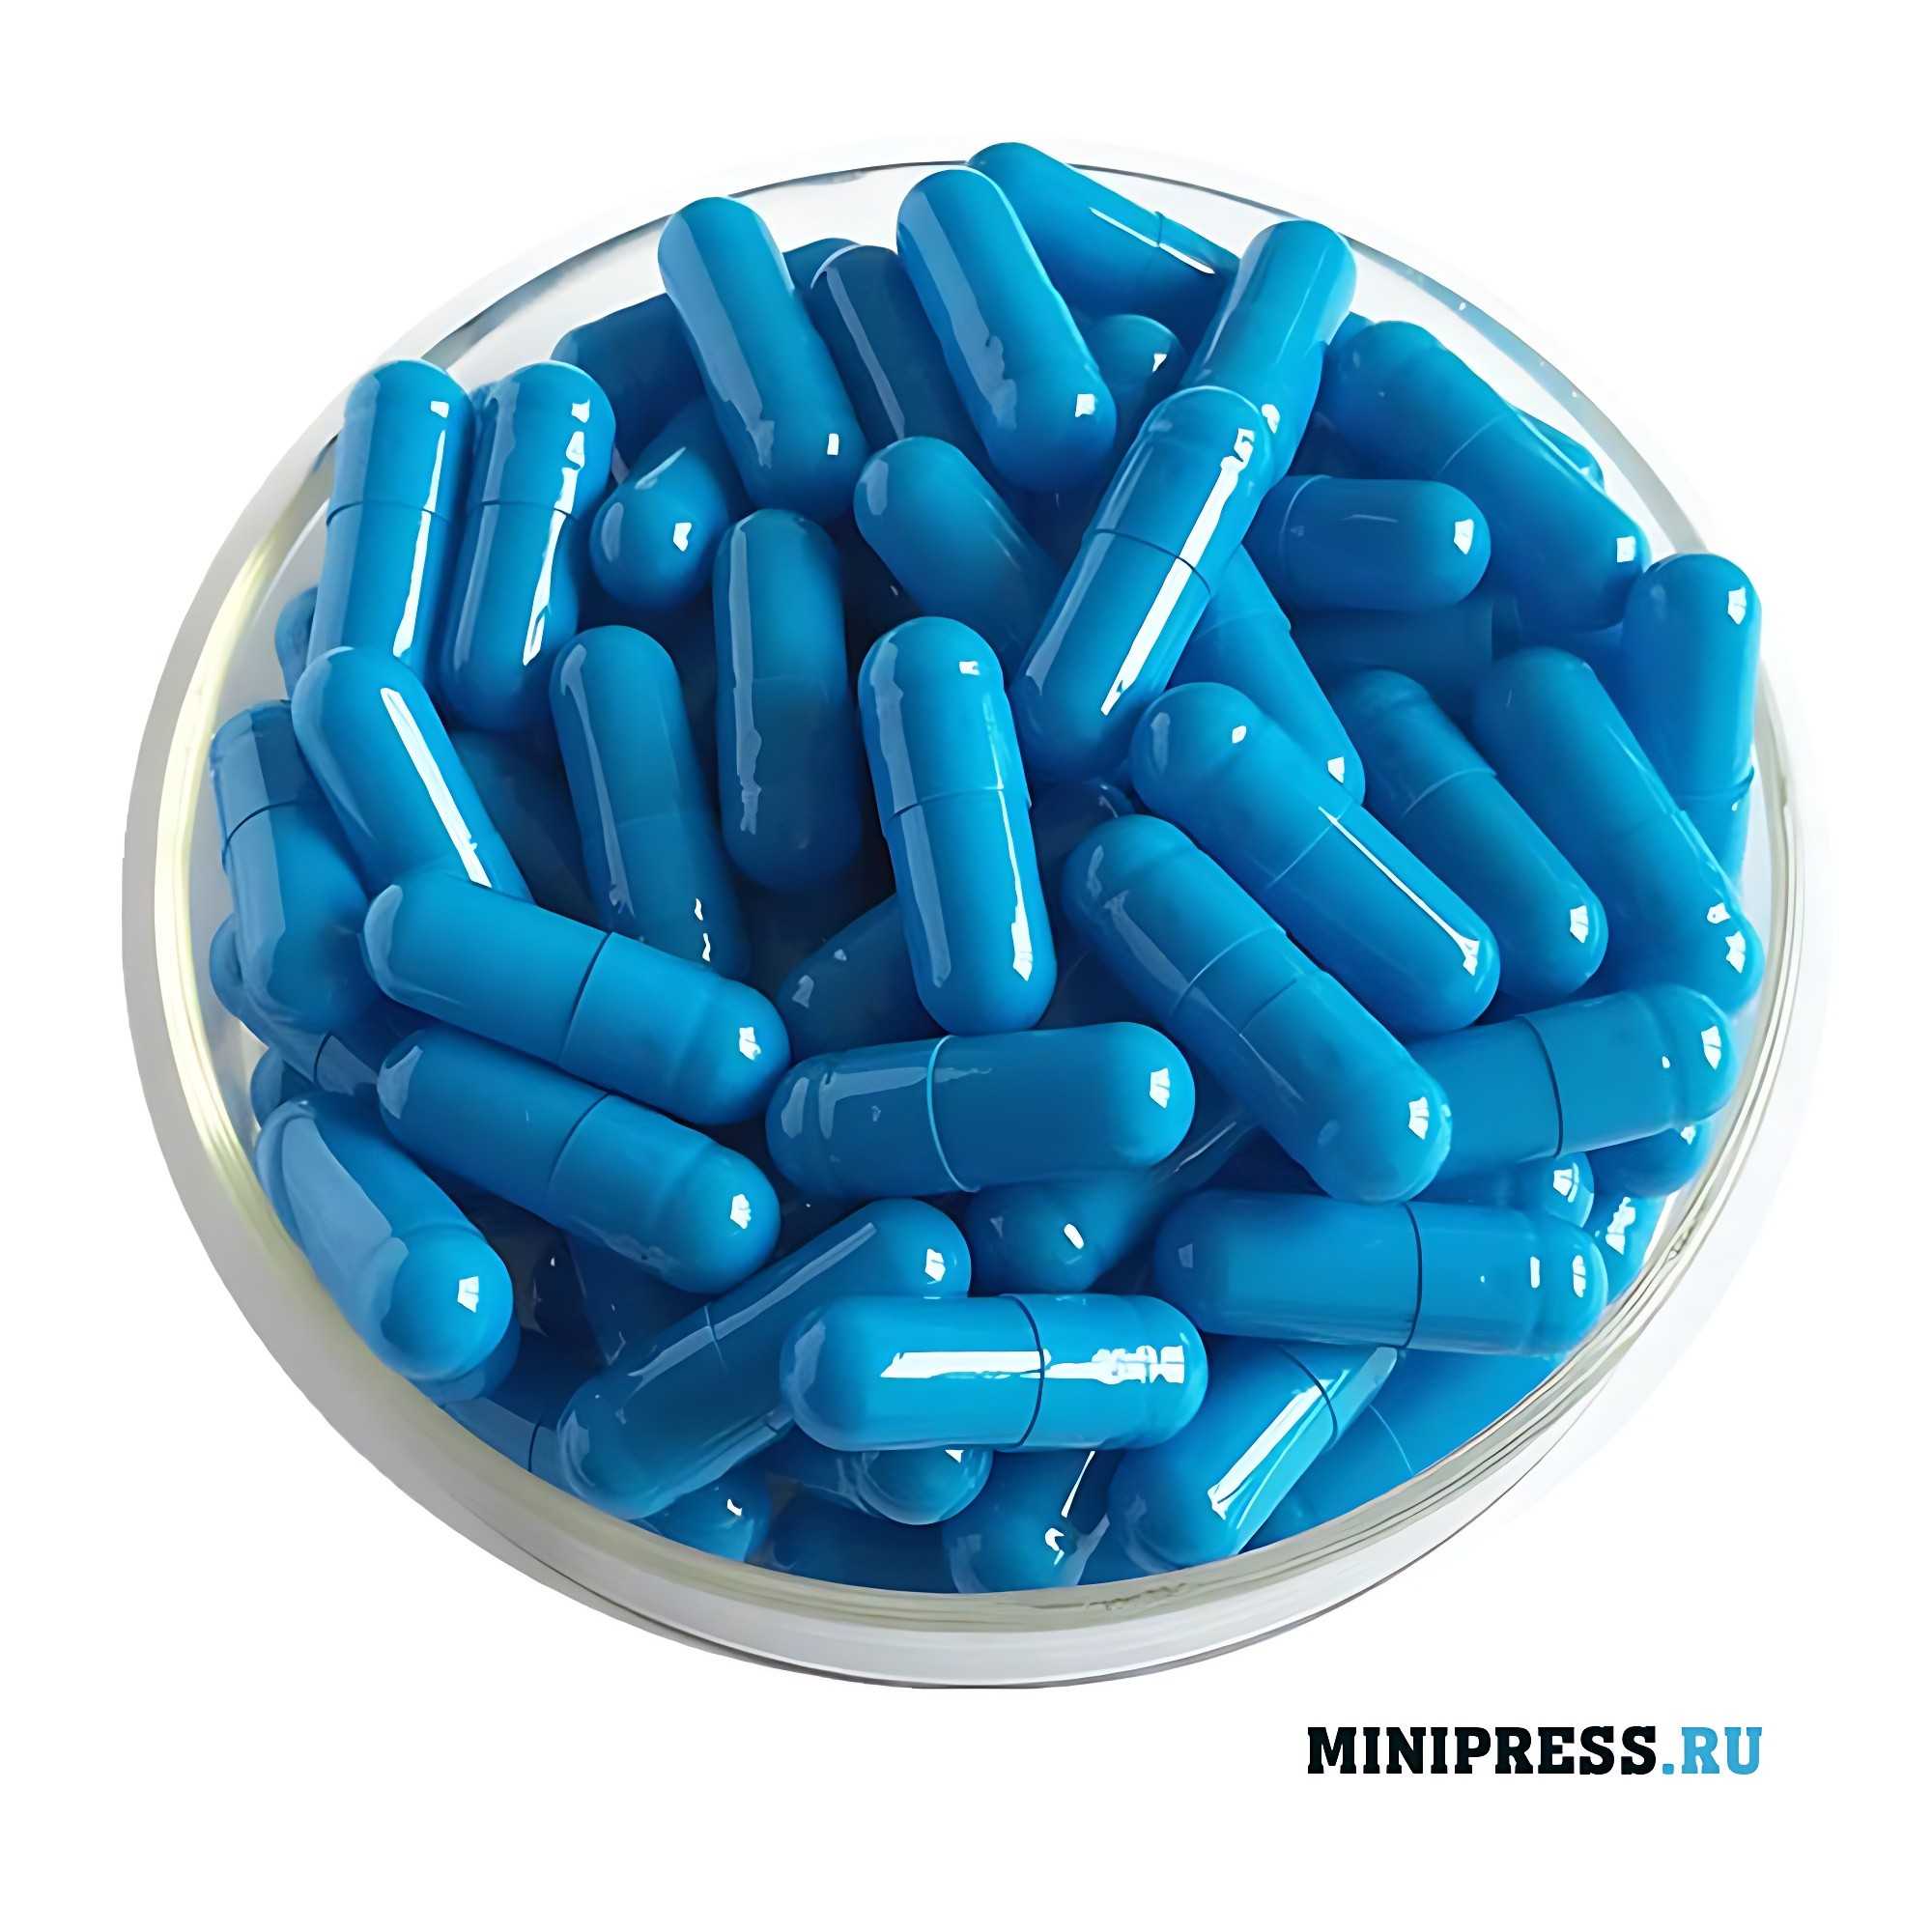 Production of medical capsules